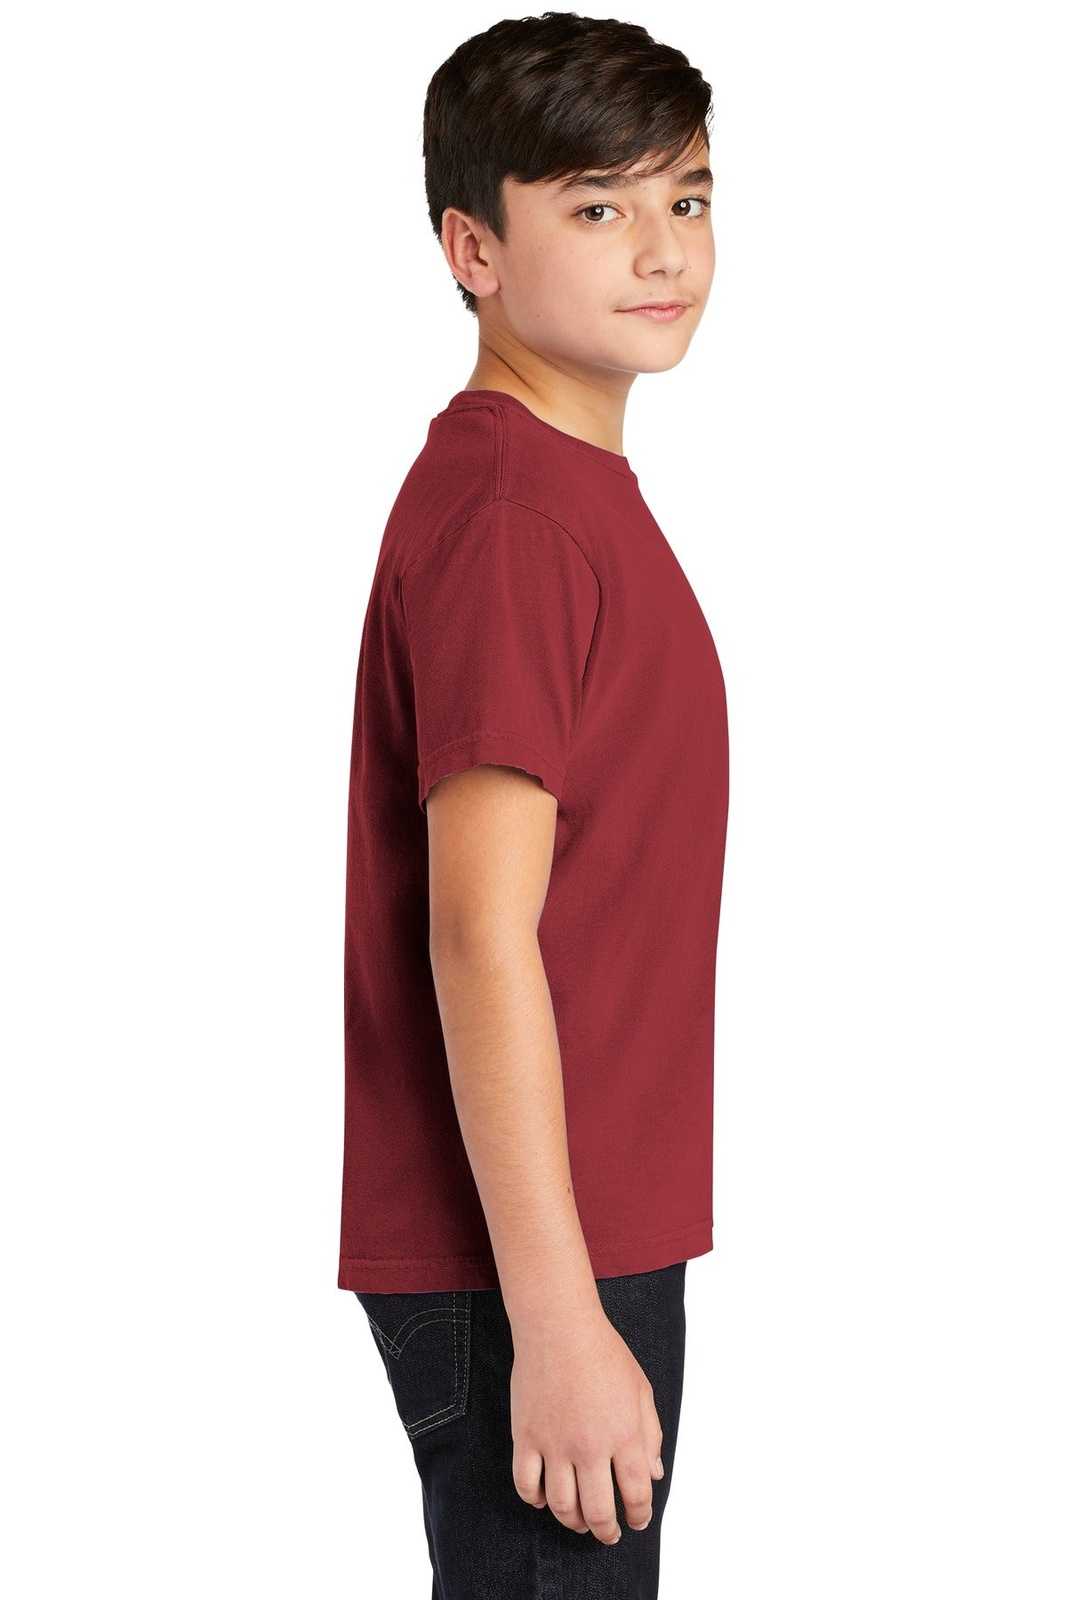 Comfort Colors 9018 Youth Midweight Ring Spun Tee - Crimson - HIT a Double